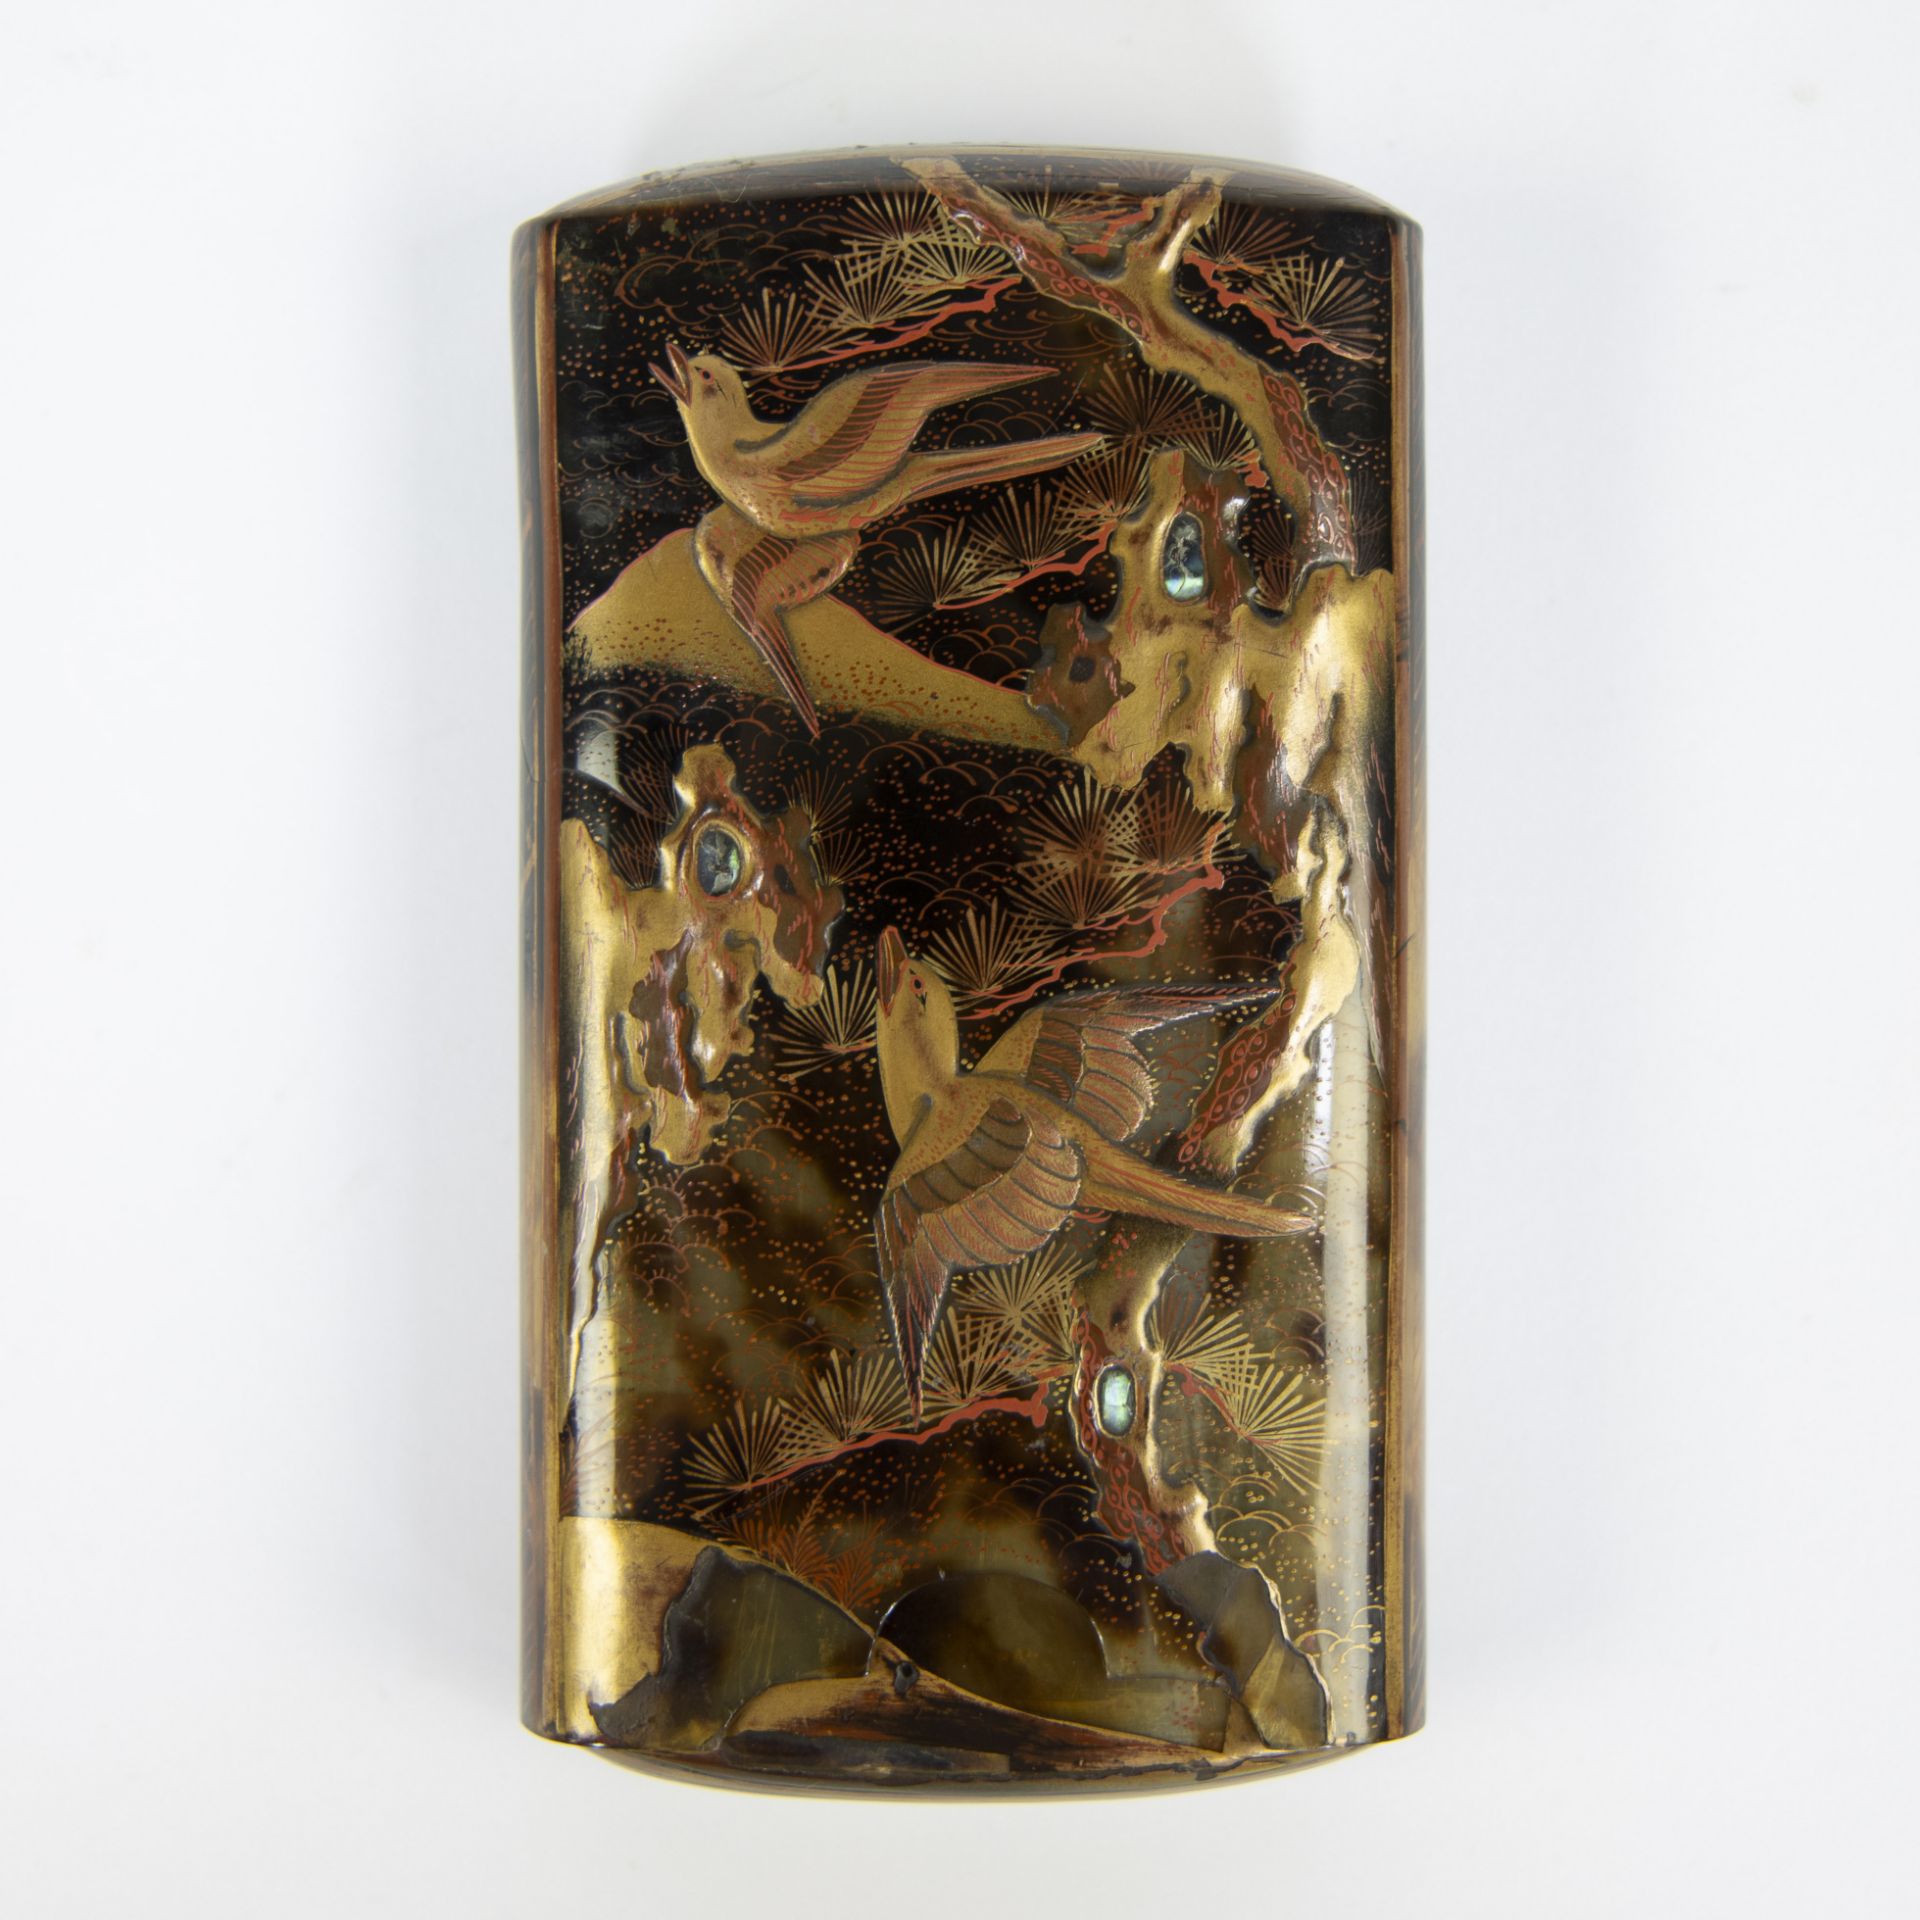 A Japanese Meiji period lacquered tortoiseshell cigar case decorated with cranes and birds in a land - Bild 2 aus 7